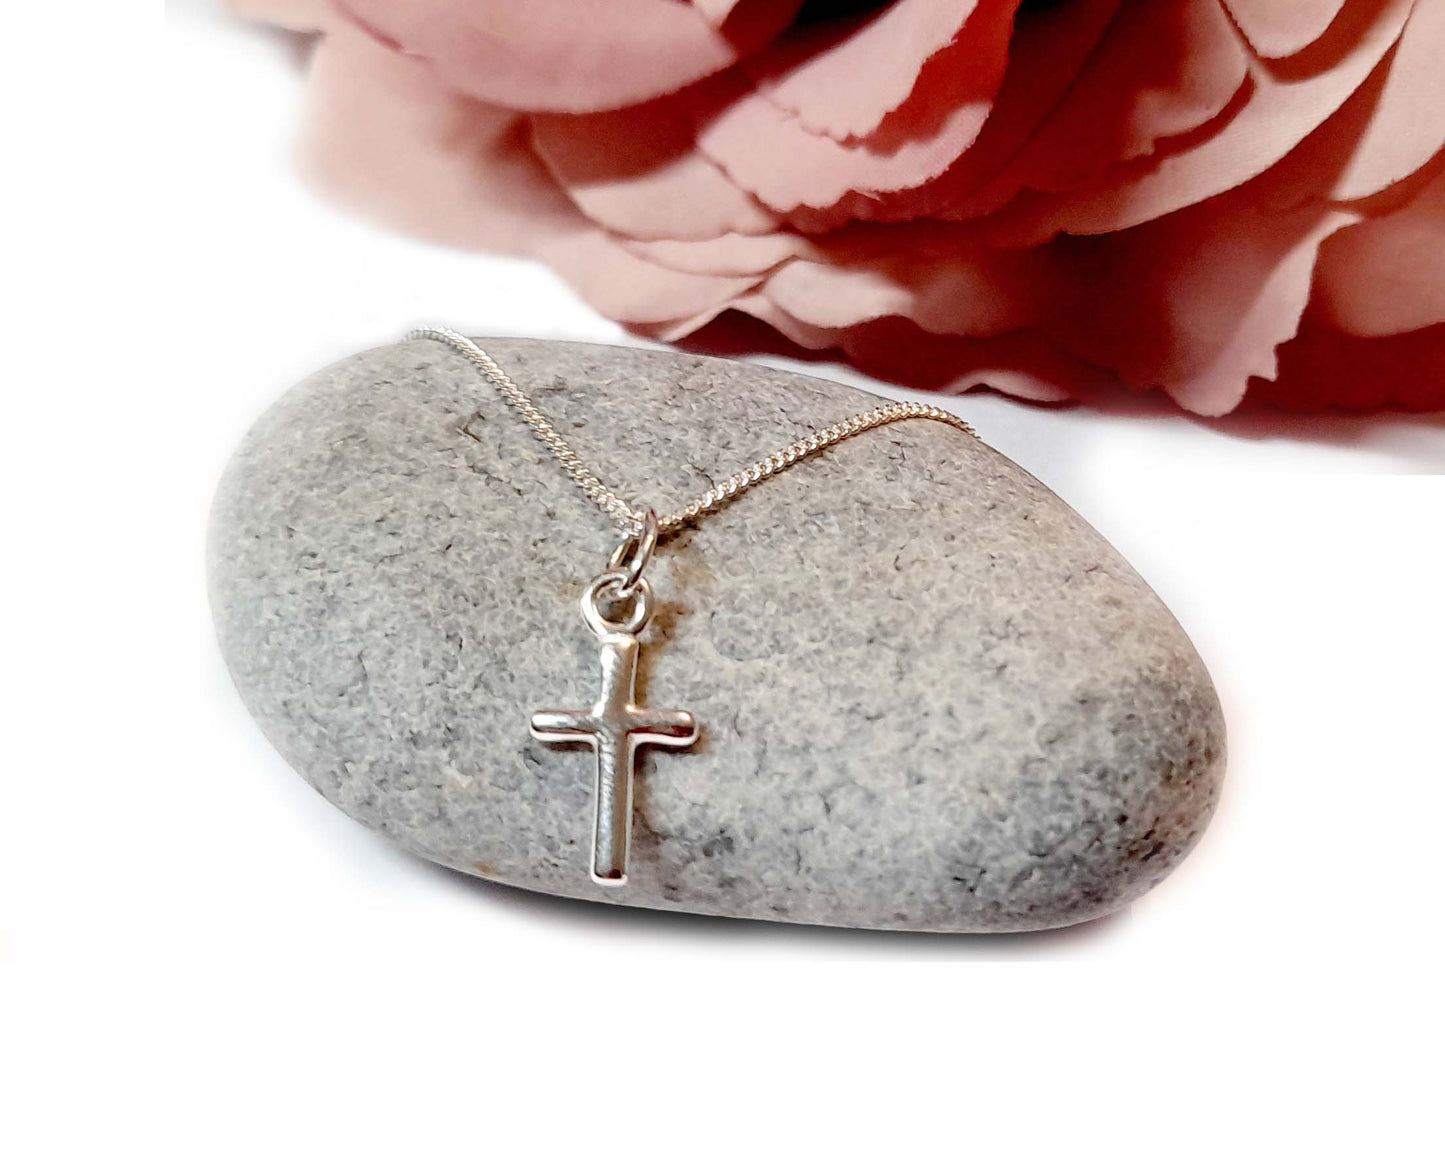 First Holy Communion Cross Necklace with Birthstone in Sterling Silver 925, Personalised Keepsake Gift